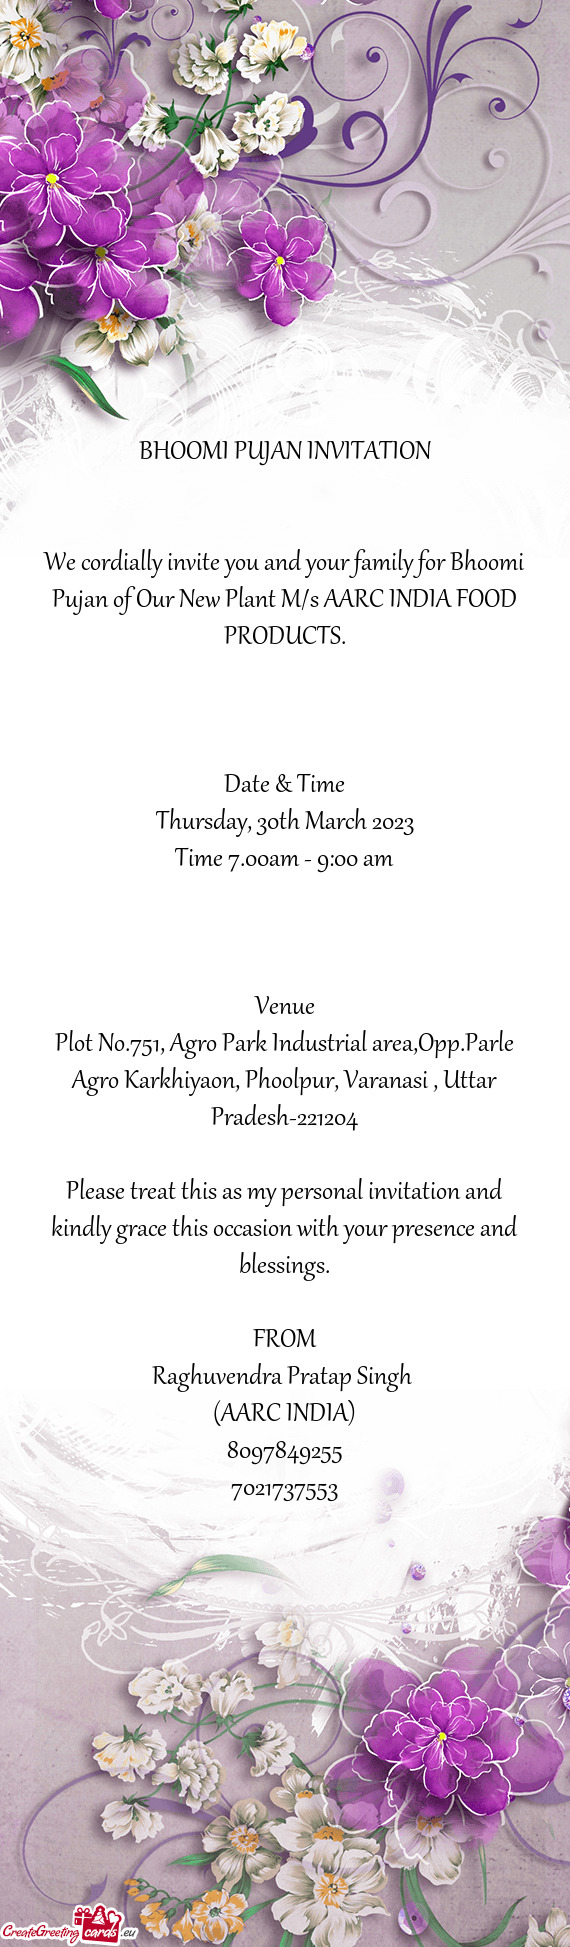 We cordially invite you and your family for Bhoomi Pujan of Our New Plant M/s AARC INDIA FOOD PRODUC